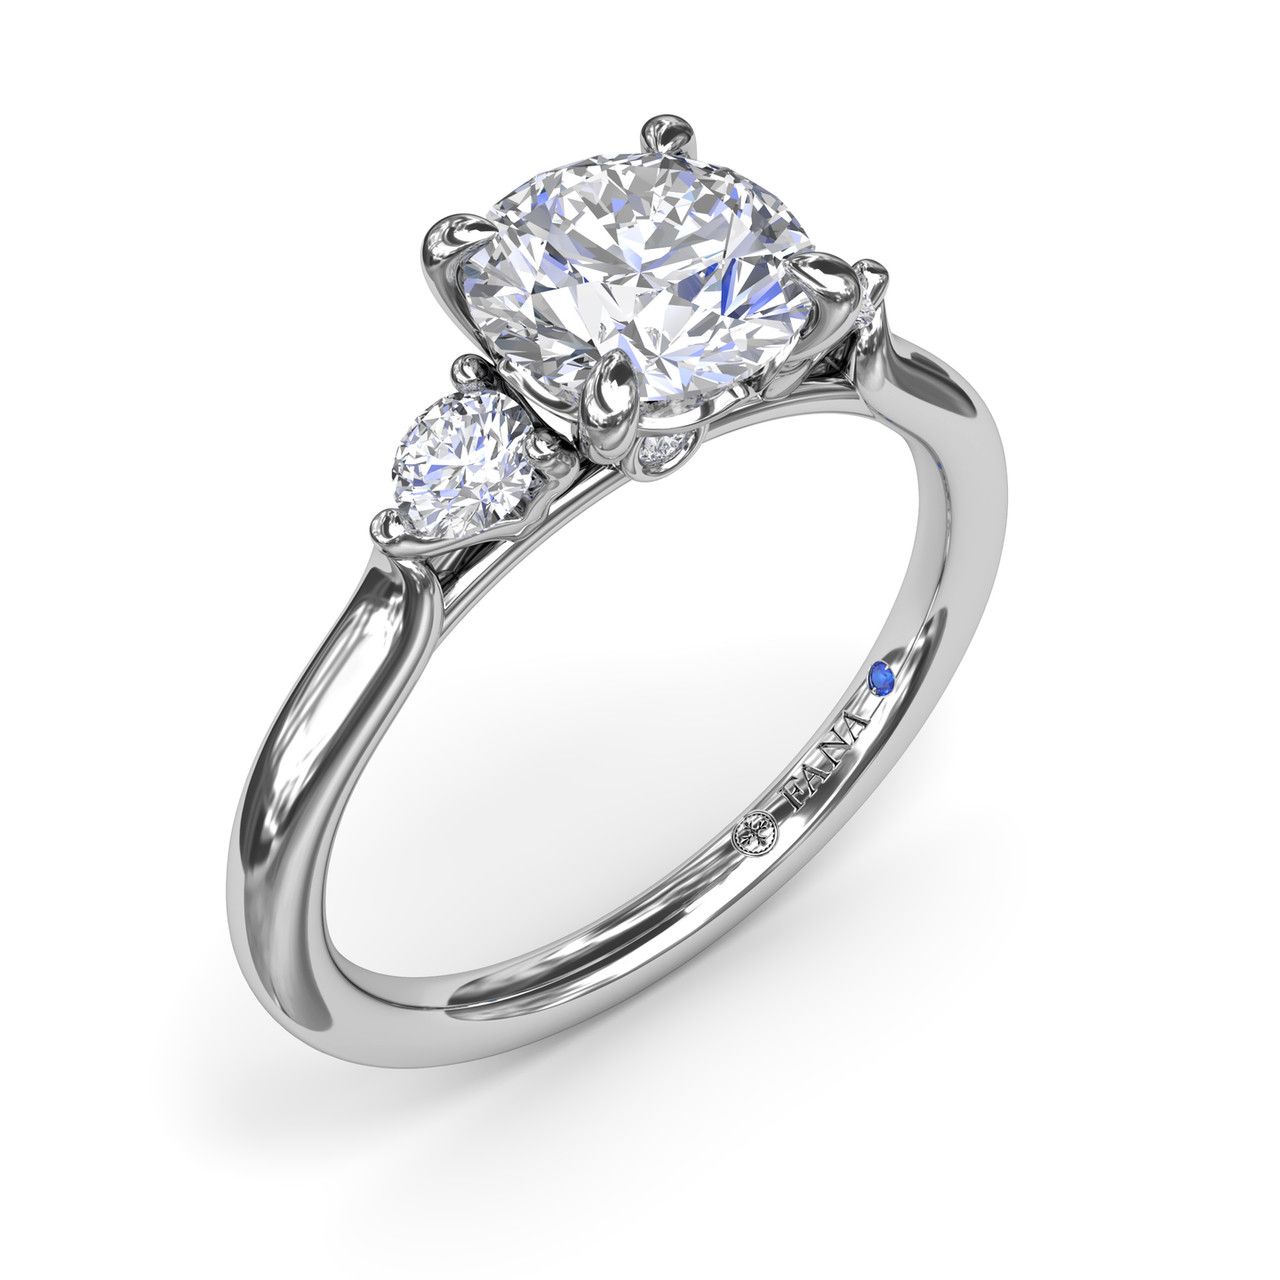 14K WHITE GOLD 3 STONE SEMI-MOUNT RING SIZE 6.5 WITH 4=0.23TW ROUND G-H VS2-SI1 DIAMONDS AND ONE ROUND BLUE SAPPHIRE   (2.92 GRAMS)